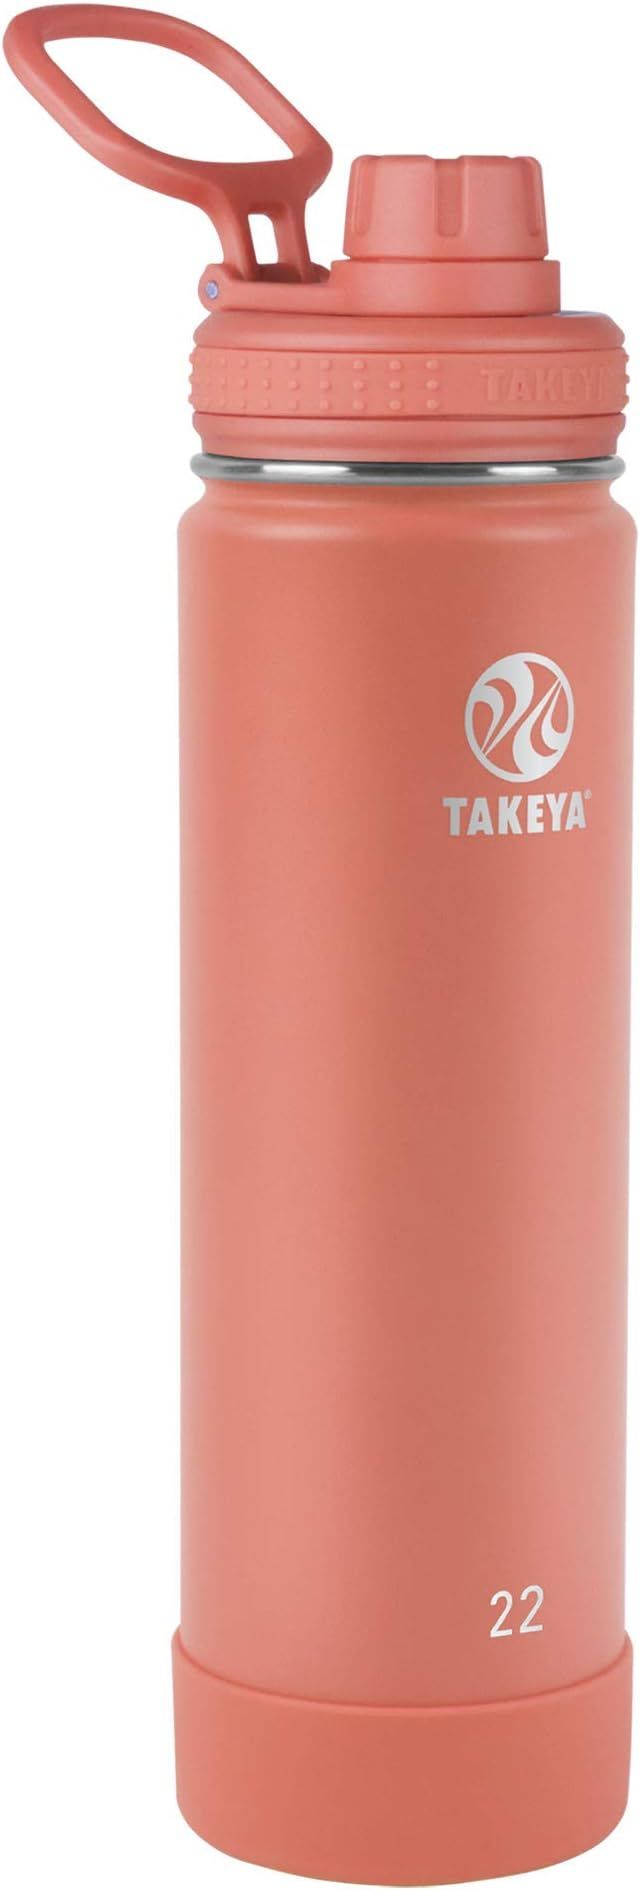 Takeya Actives Insulated Water Bottle w/Spout Lid, Coral, 22 Ounce | Amazon (US)